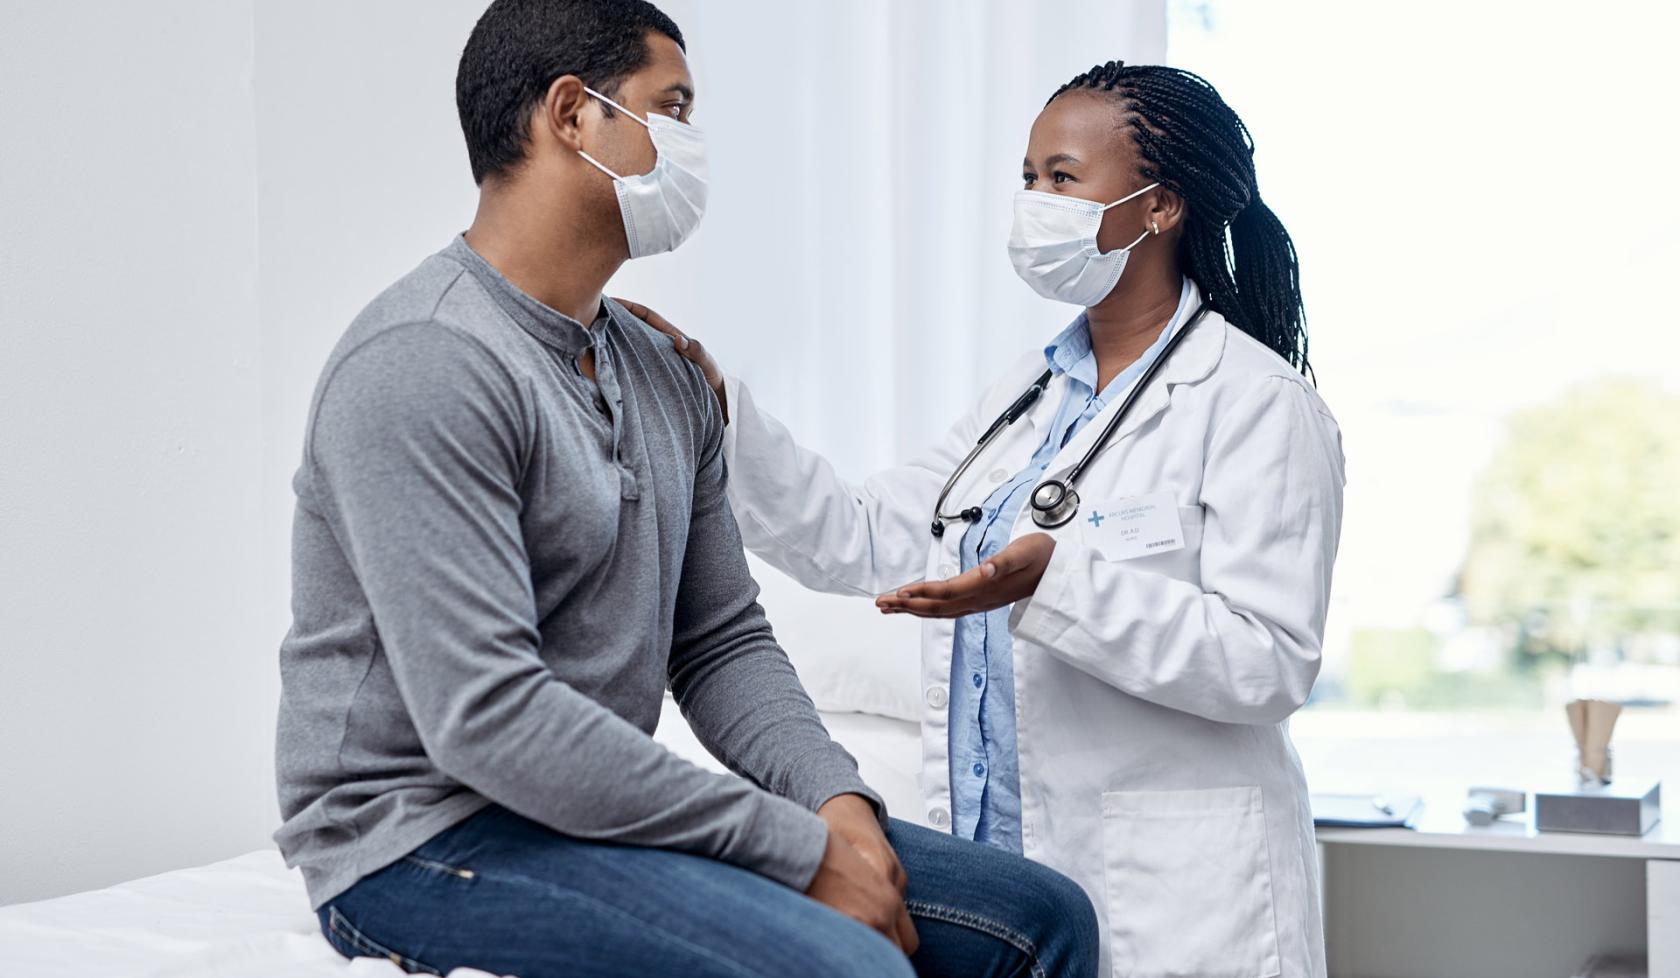 Black Masked Female Doctor Treating a Patient - Indoors